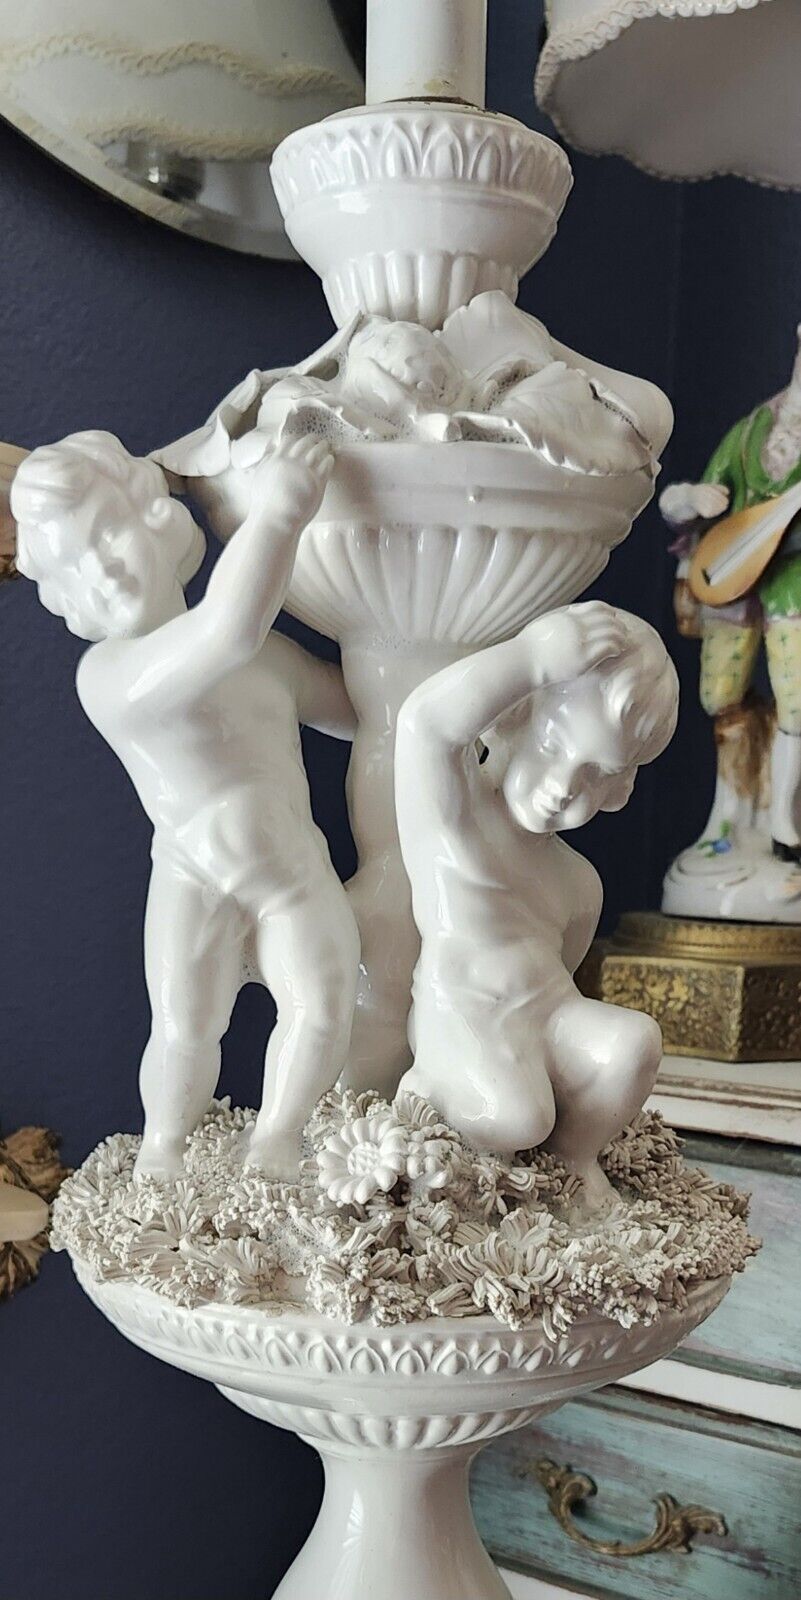 Tall Vintage Casa Pupo Lamp With 2 Cherubs And Ornate Detailing Rare Find MCM 